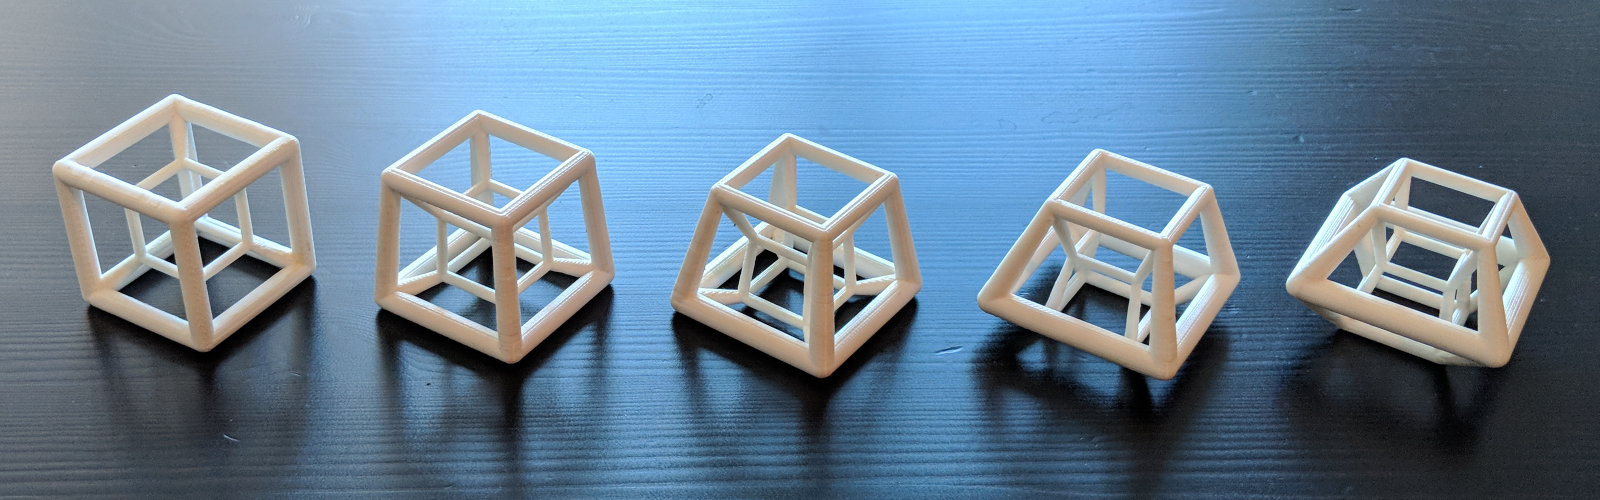 series of five printed hypercubes in a row, sitting on a wooden table.